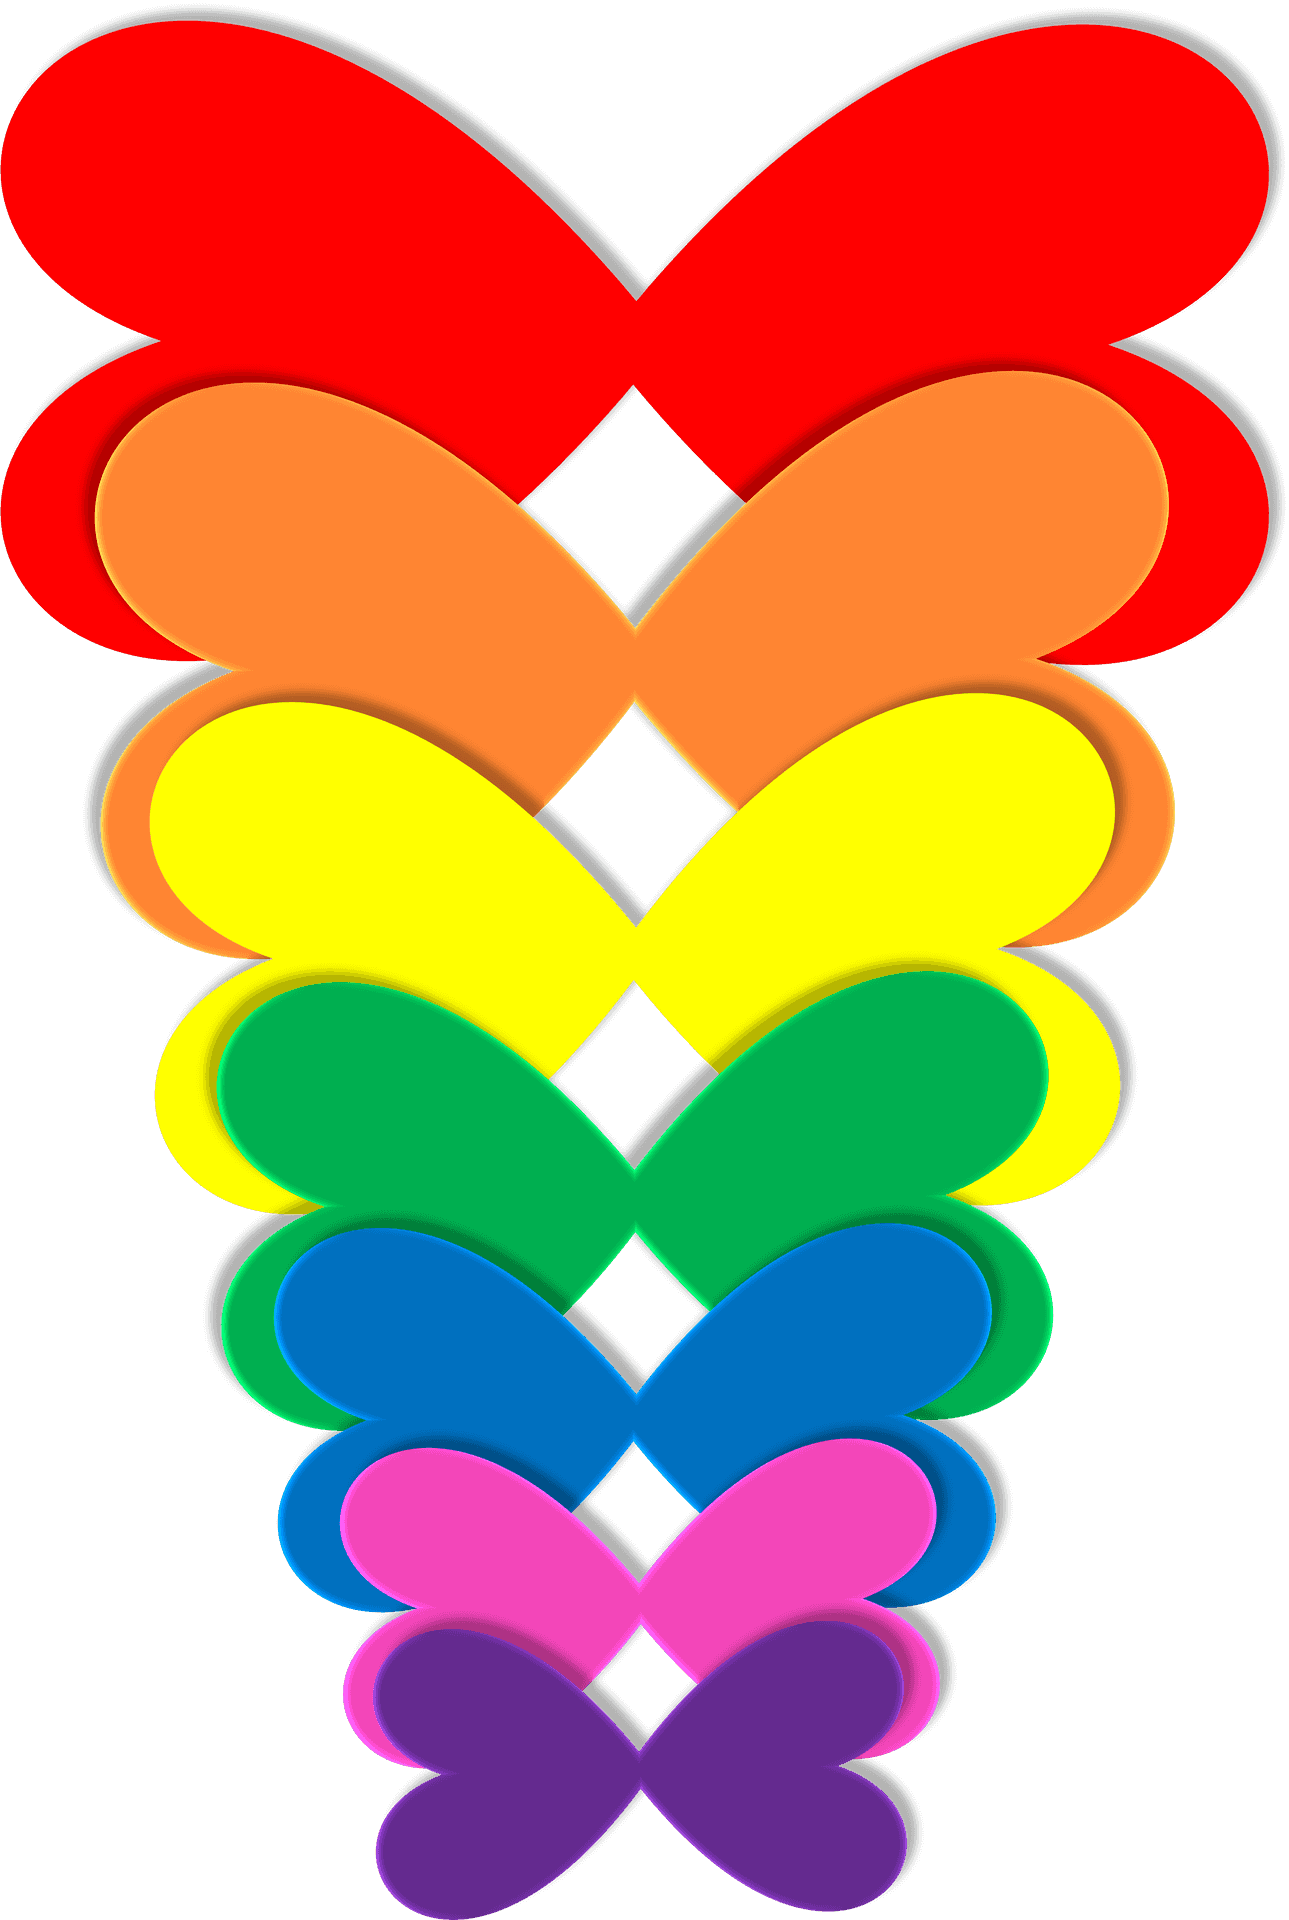 Colorful Heart Spectrum Art PNG image